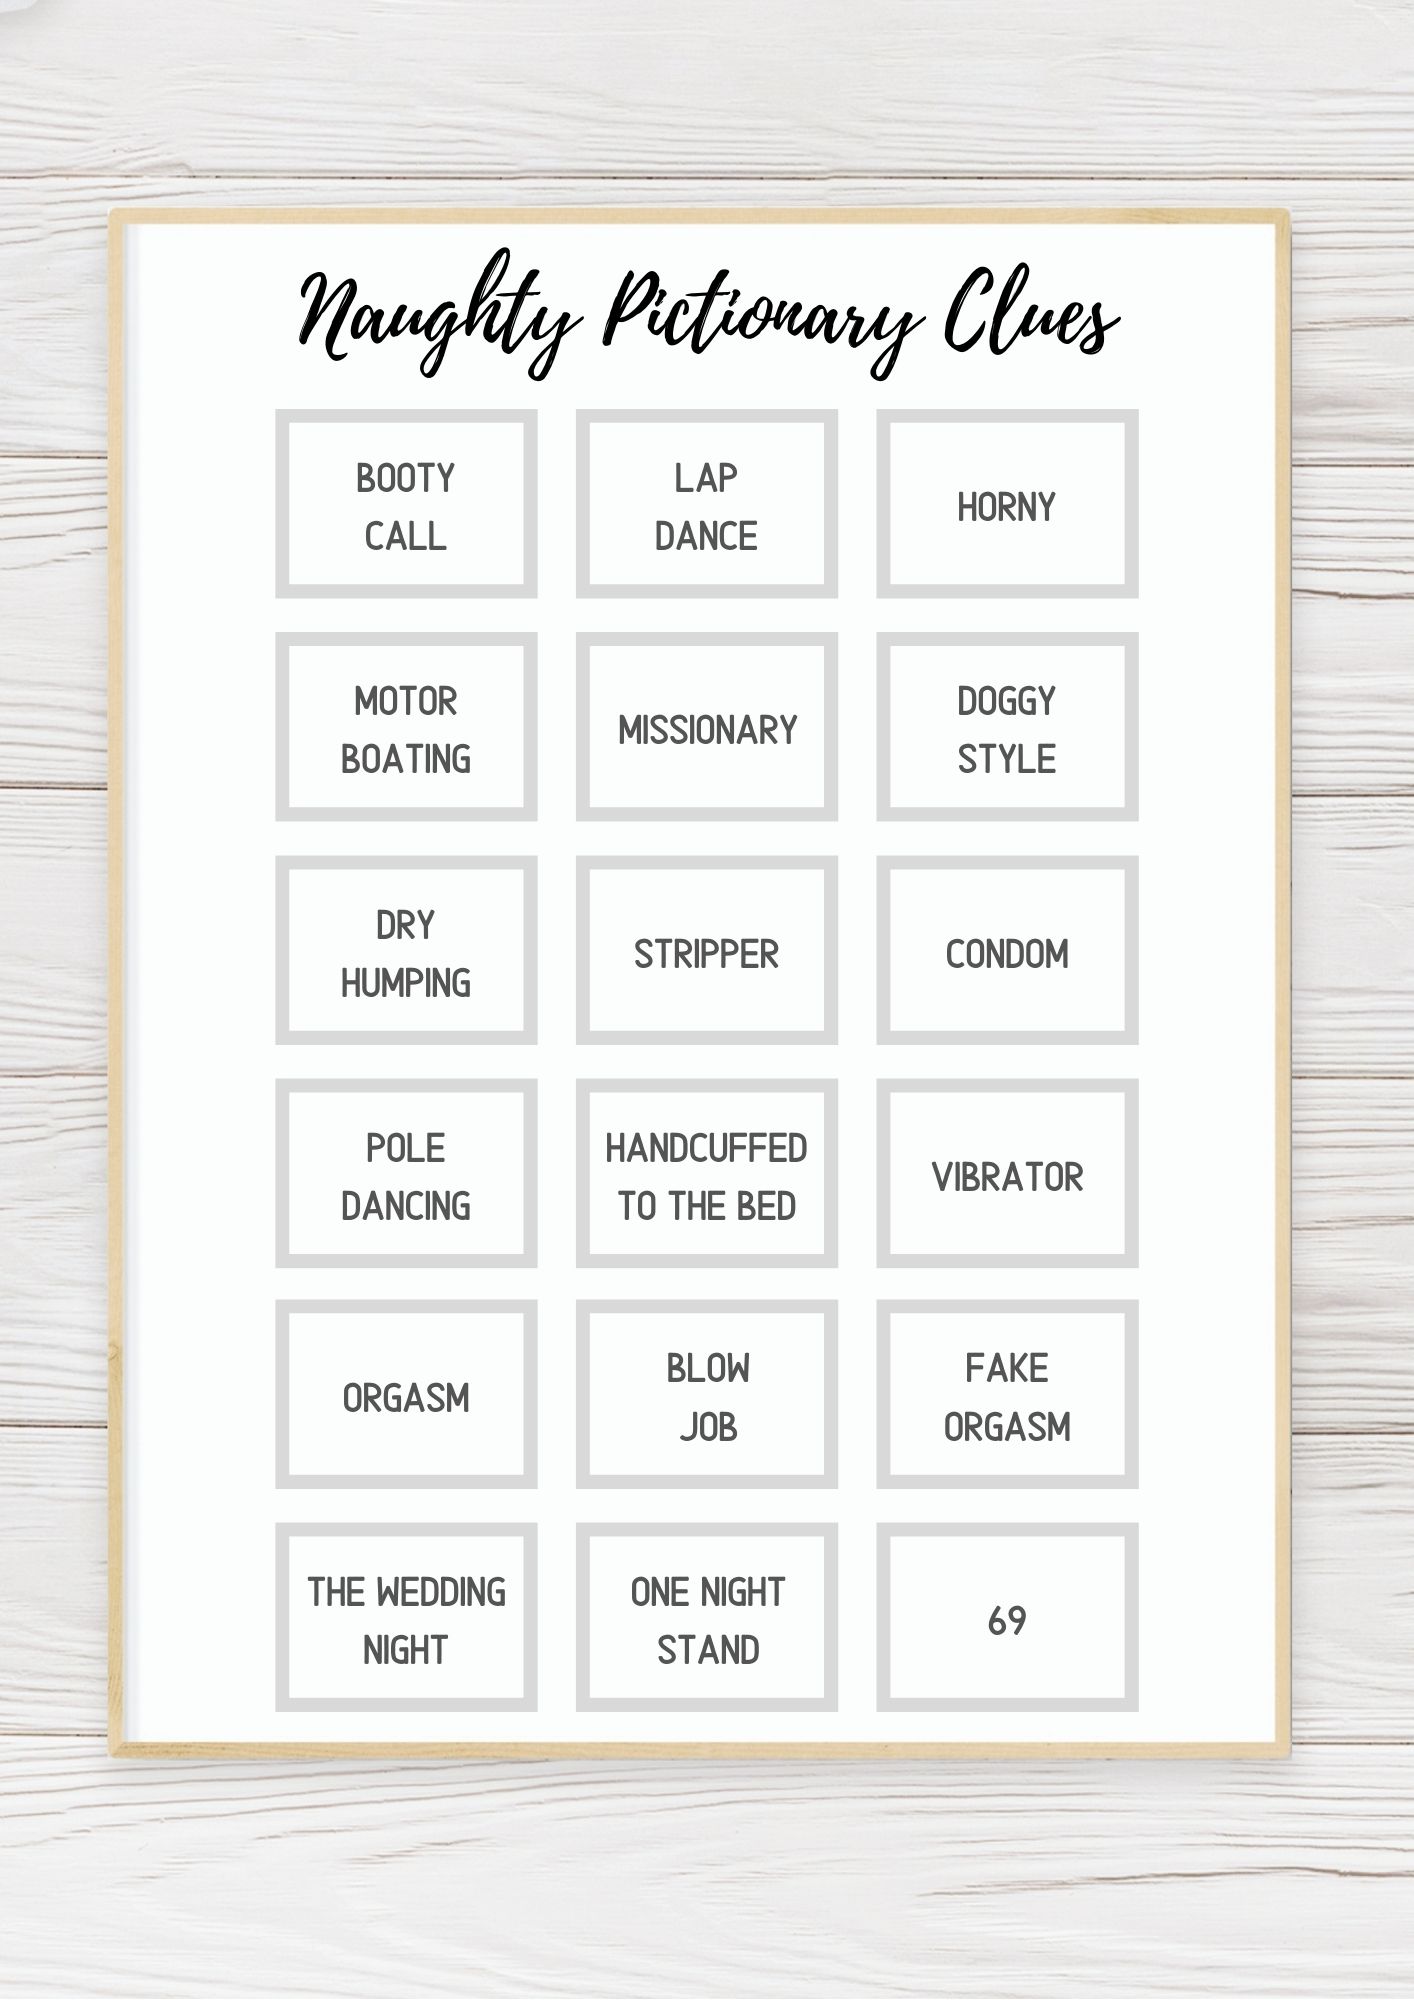 Hilariously Dirty Pictionary Words (FREE Printable!)